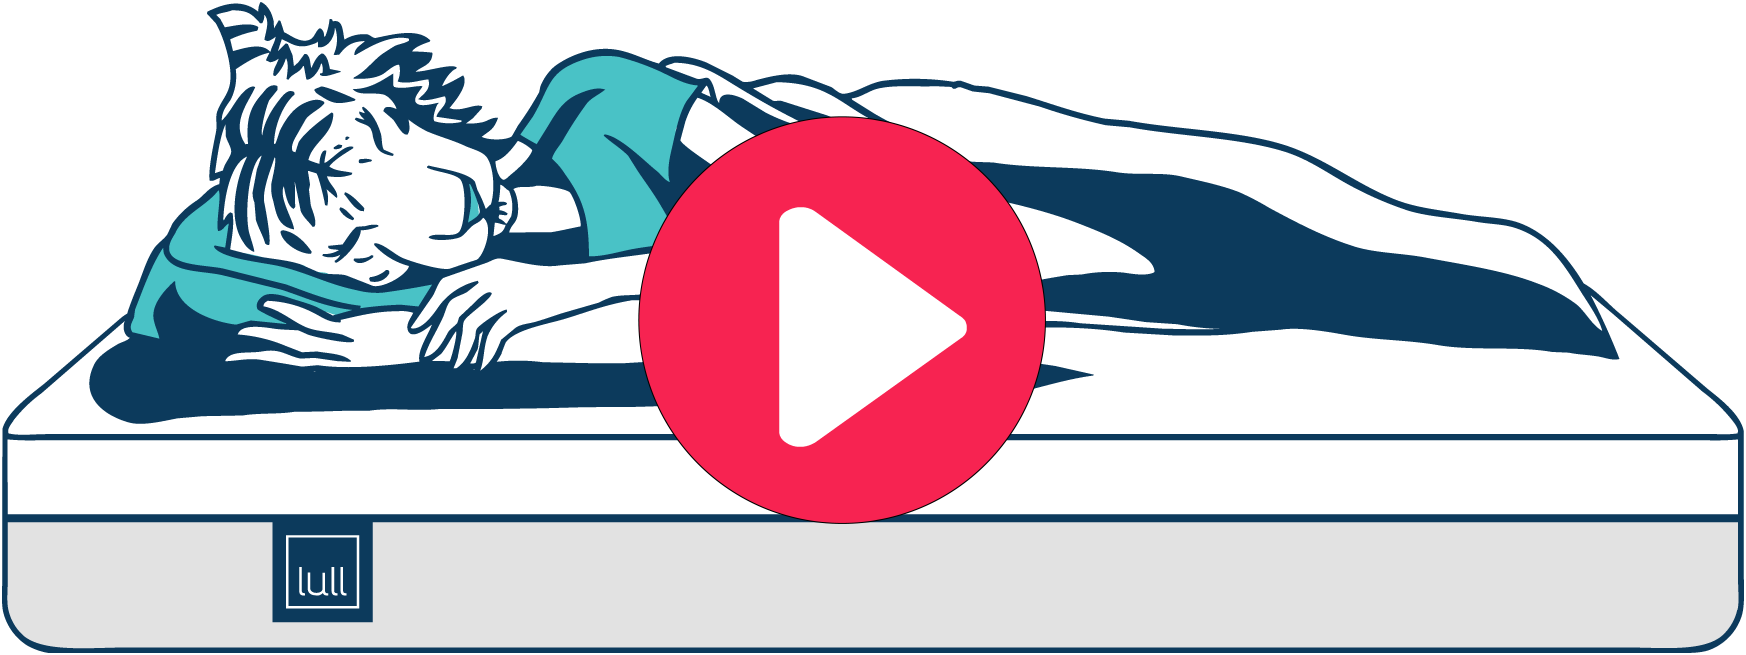 Load video: Why you will sleep better and have great sleep with a lull mattress.